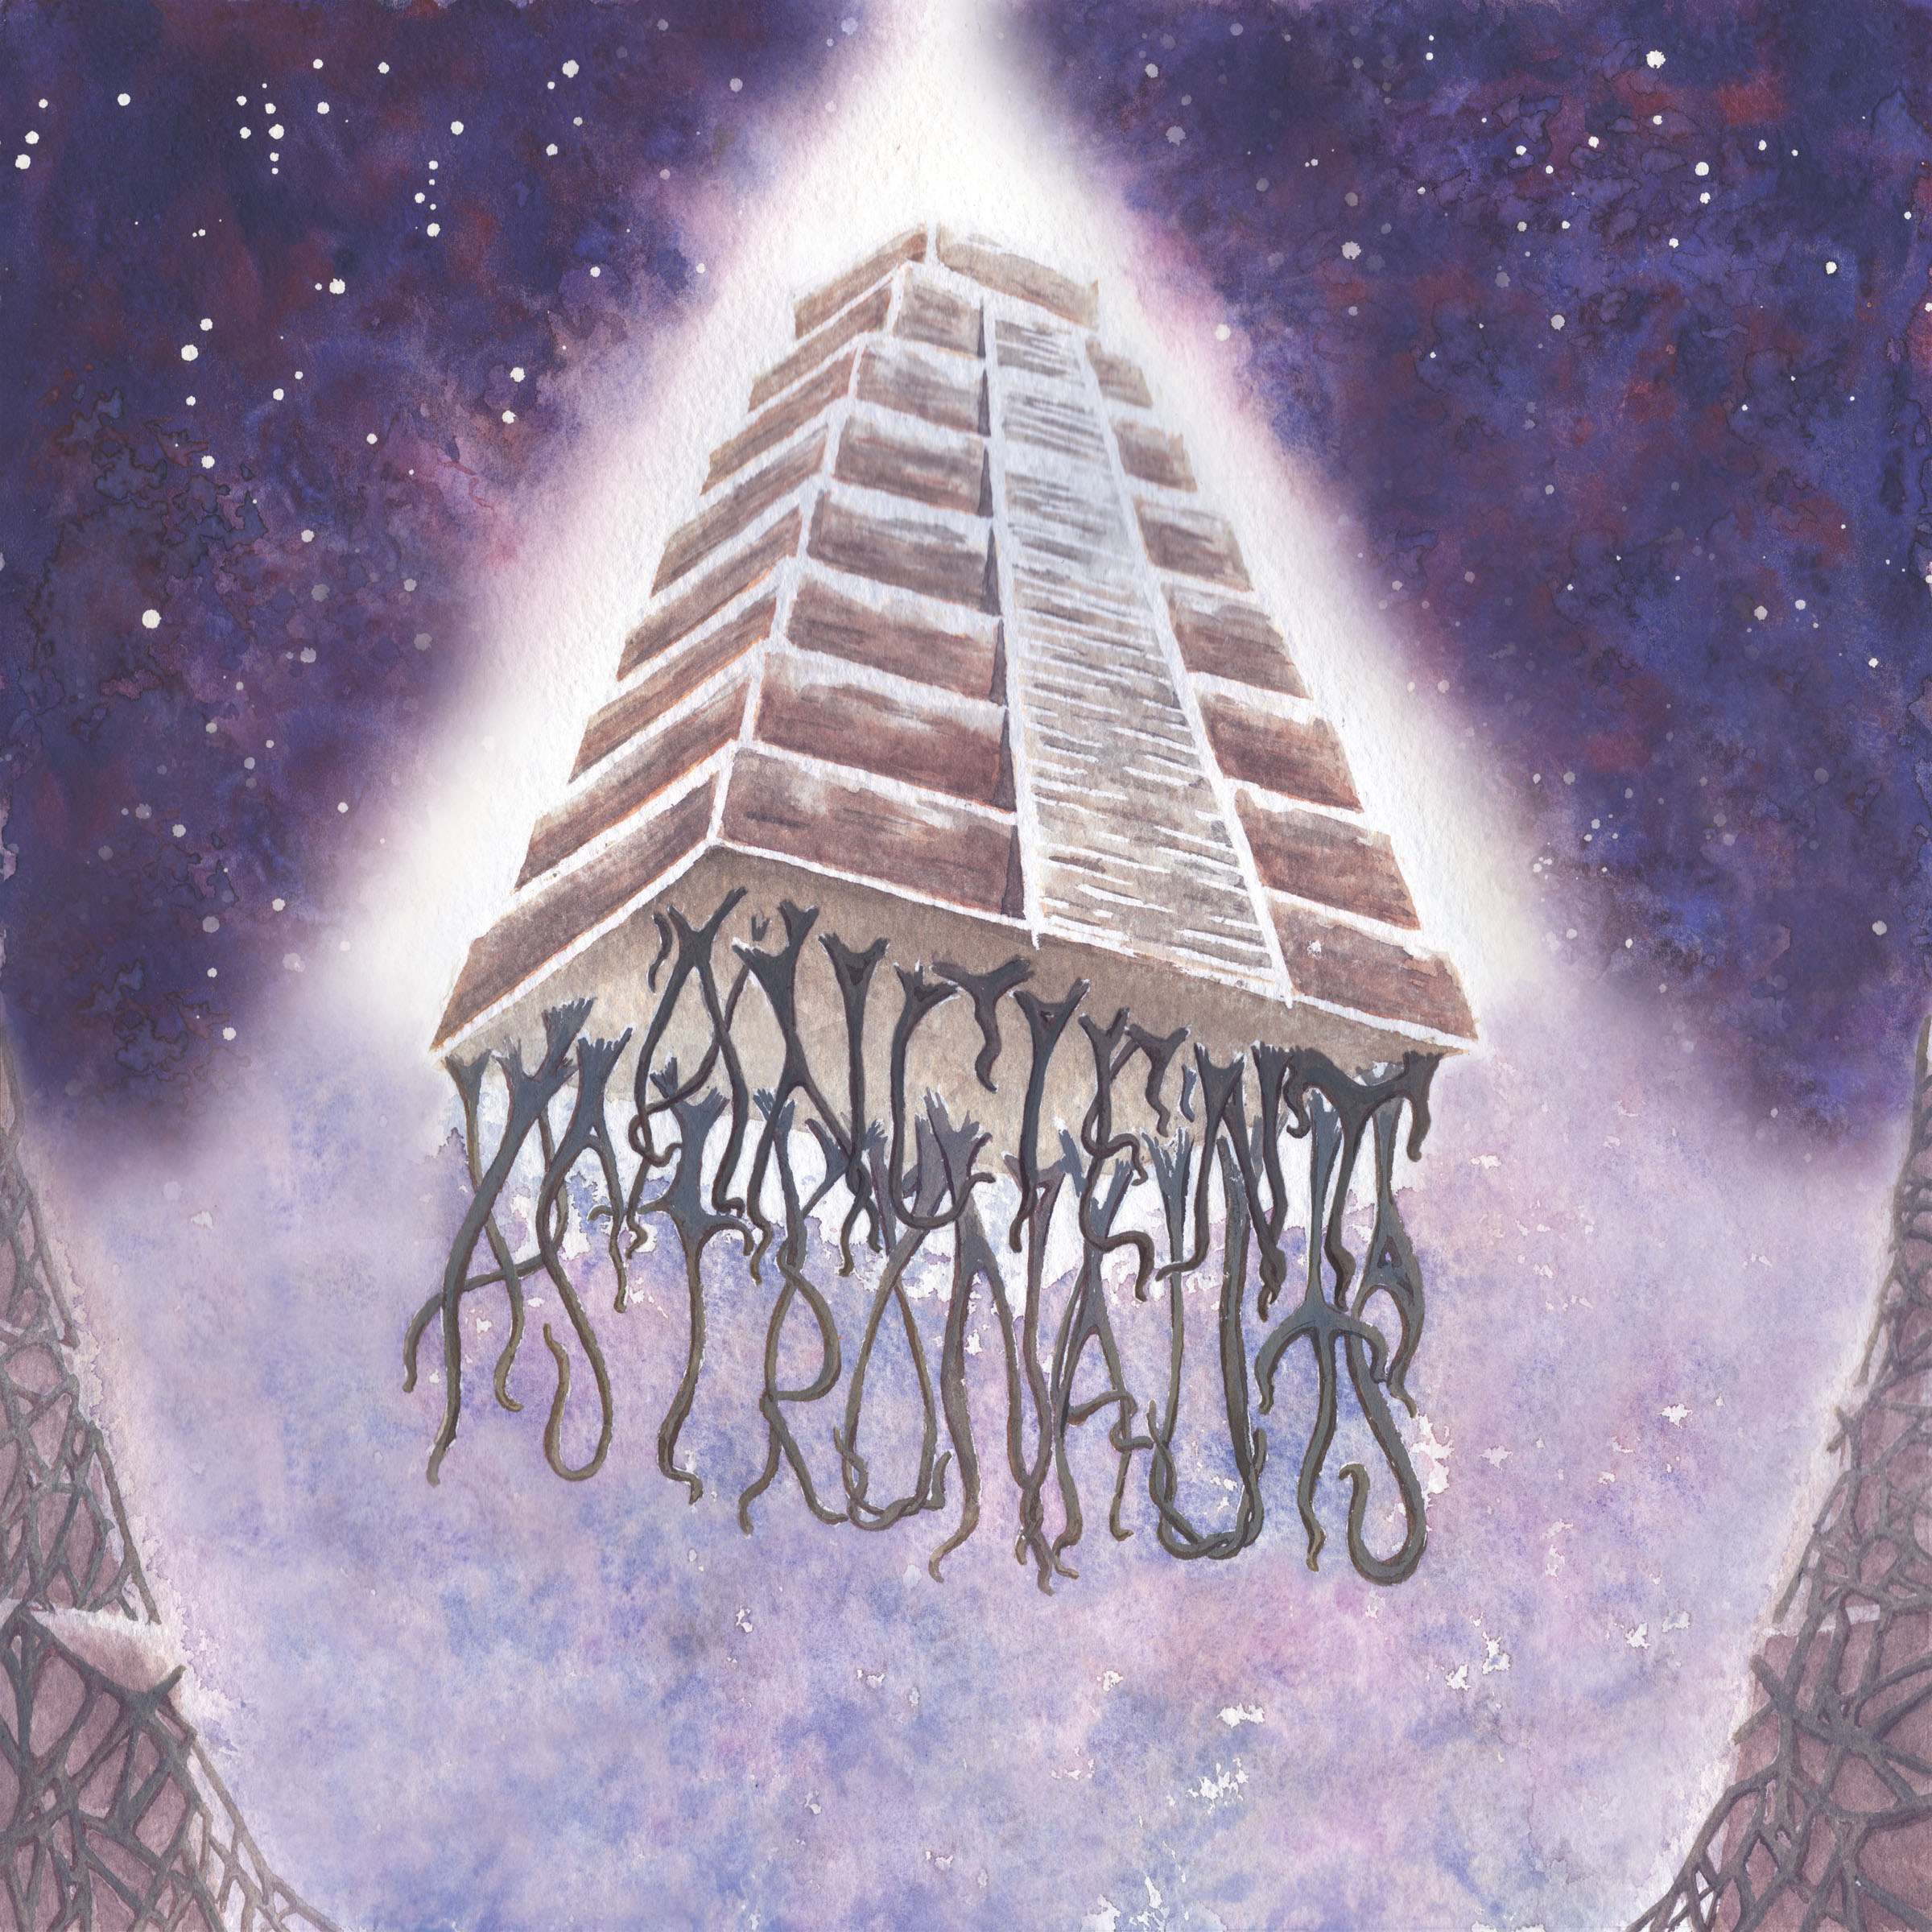 Holy Mountain - Ancient Astronauts